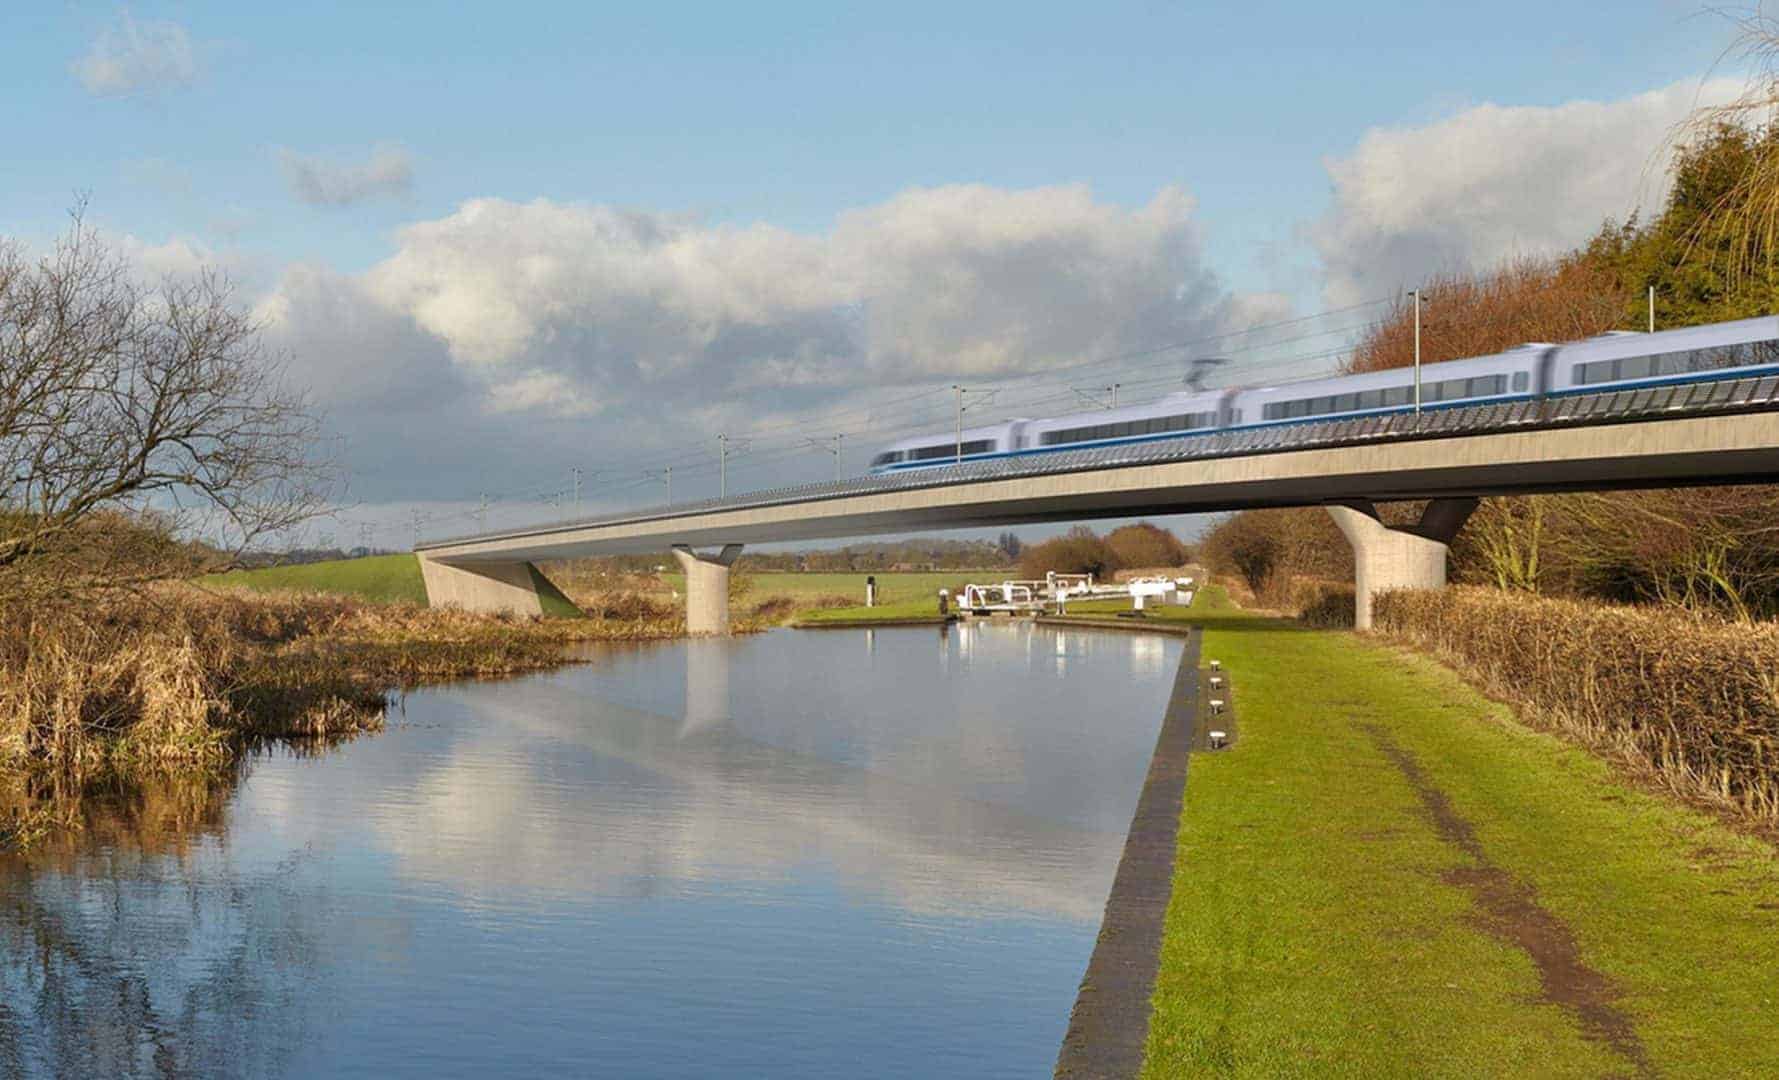 UK in ‘preliminary’ talks with China over building HS2 rail link